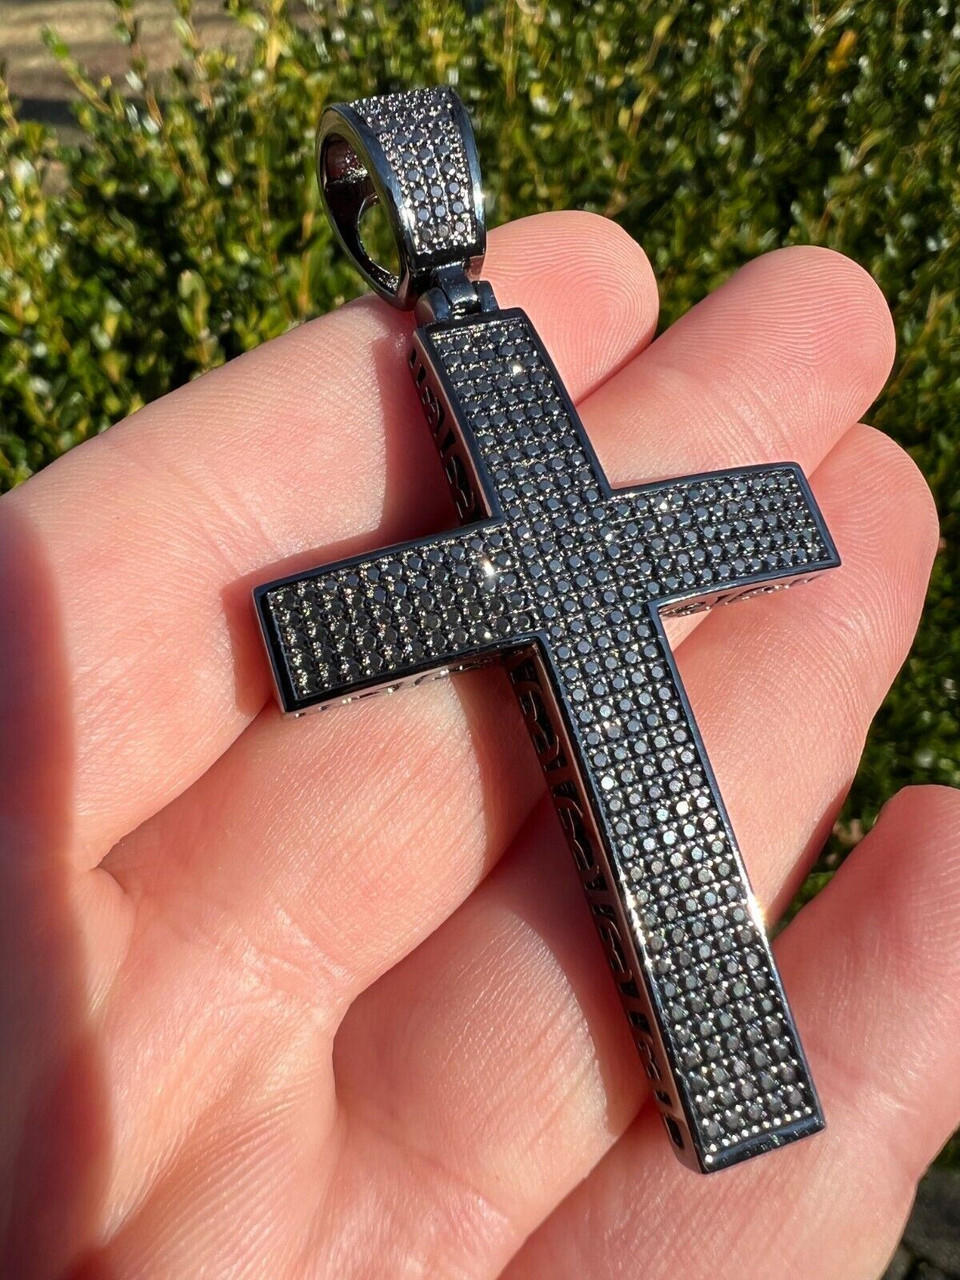 Trendy hip-hop Black Diamond Cross personality Pendant necklace men jewelry  CRRSHOP male cross necklace new fashion trend holiday gifts present chain  length 27 inches |TospinoMall online shopping platform in GhanaTospinoMall  Ghana online